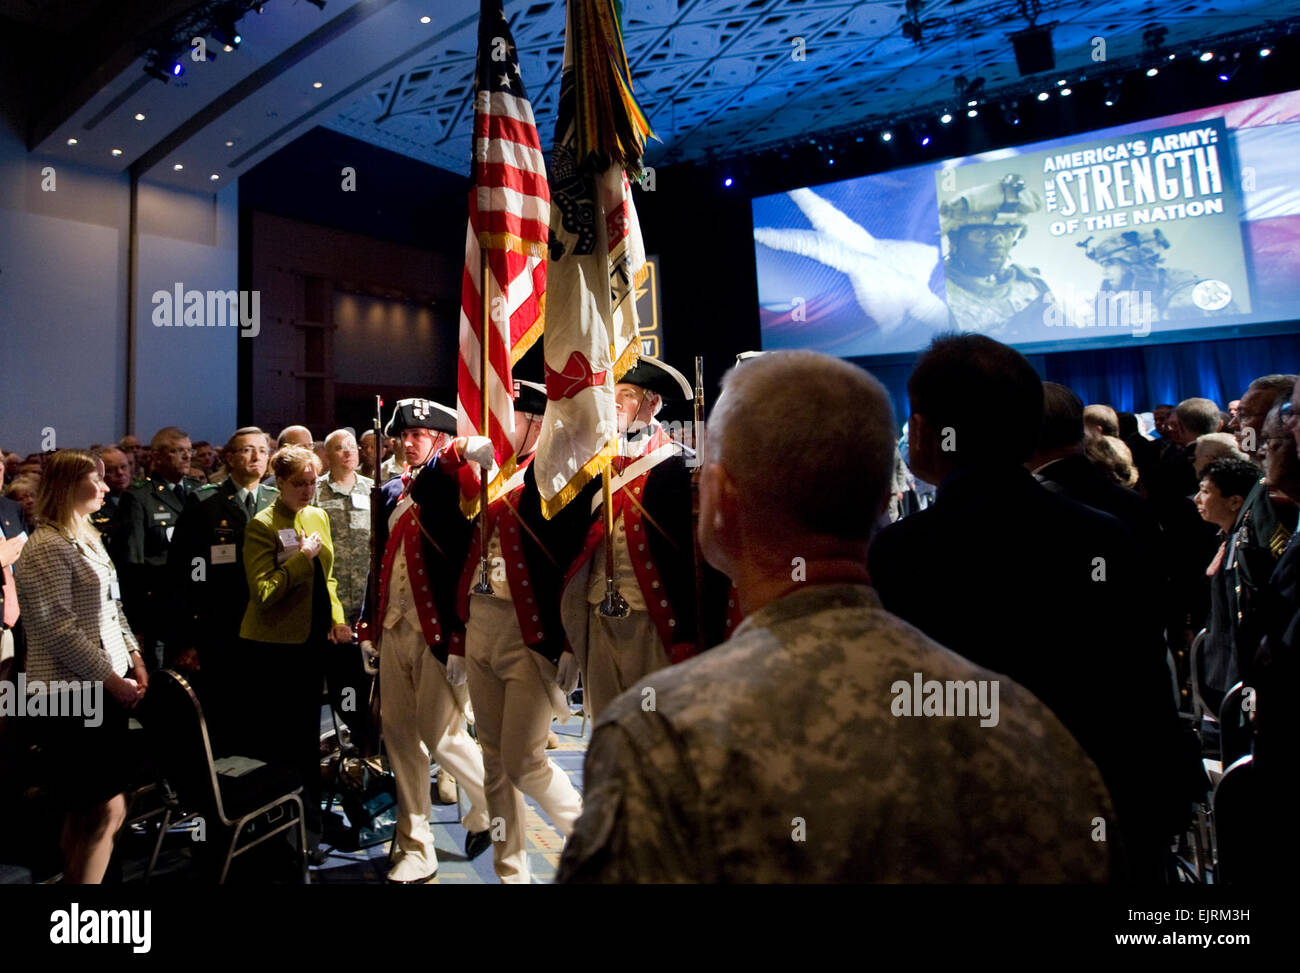 Members of the Army Honor Guard ceremoniously retire the colors at the opening ceremony of the Association of the United States Army AUSA annual meeting in Washington D.C., on Oct 6, 2008. The AUSA Annual Meeting, the world's largest landpower forum, brings together America's Army. Active, Guard and Reserve, retirees, family members and civilians. Army photo by D. Myles Cullen released Stock Photo